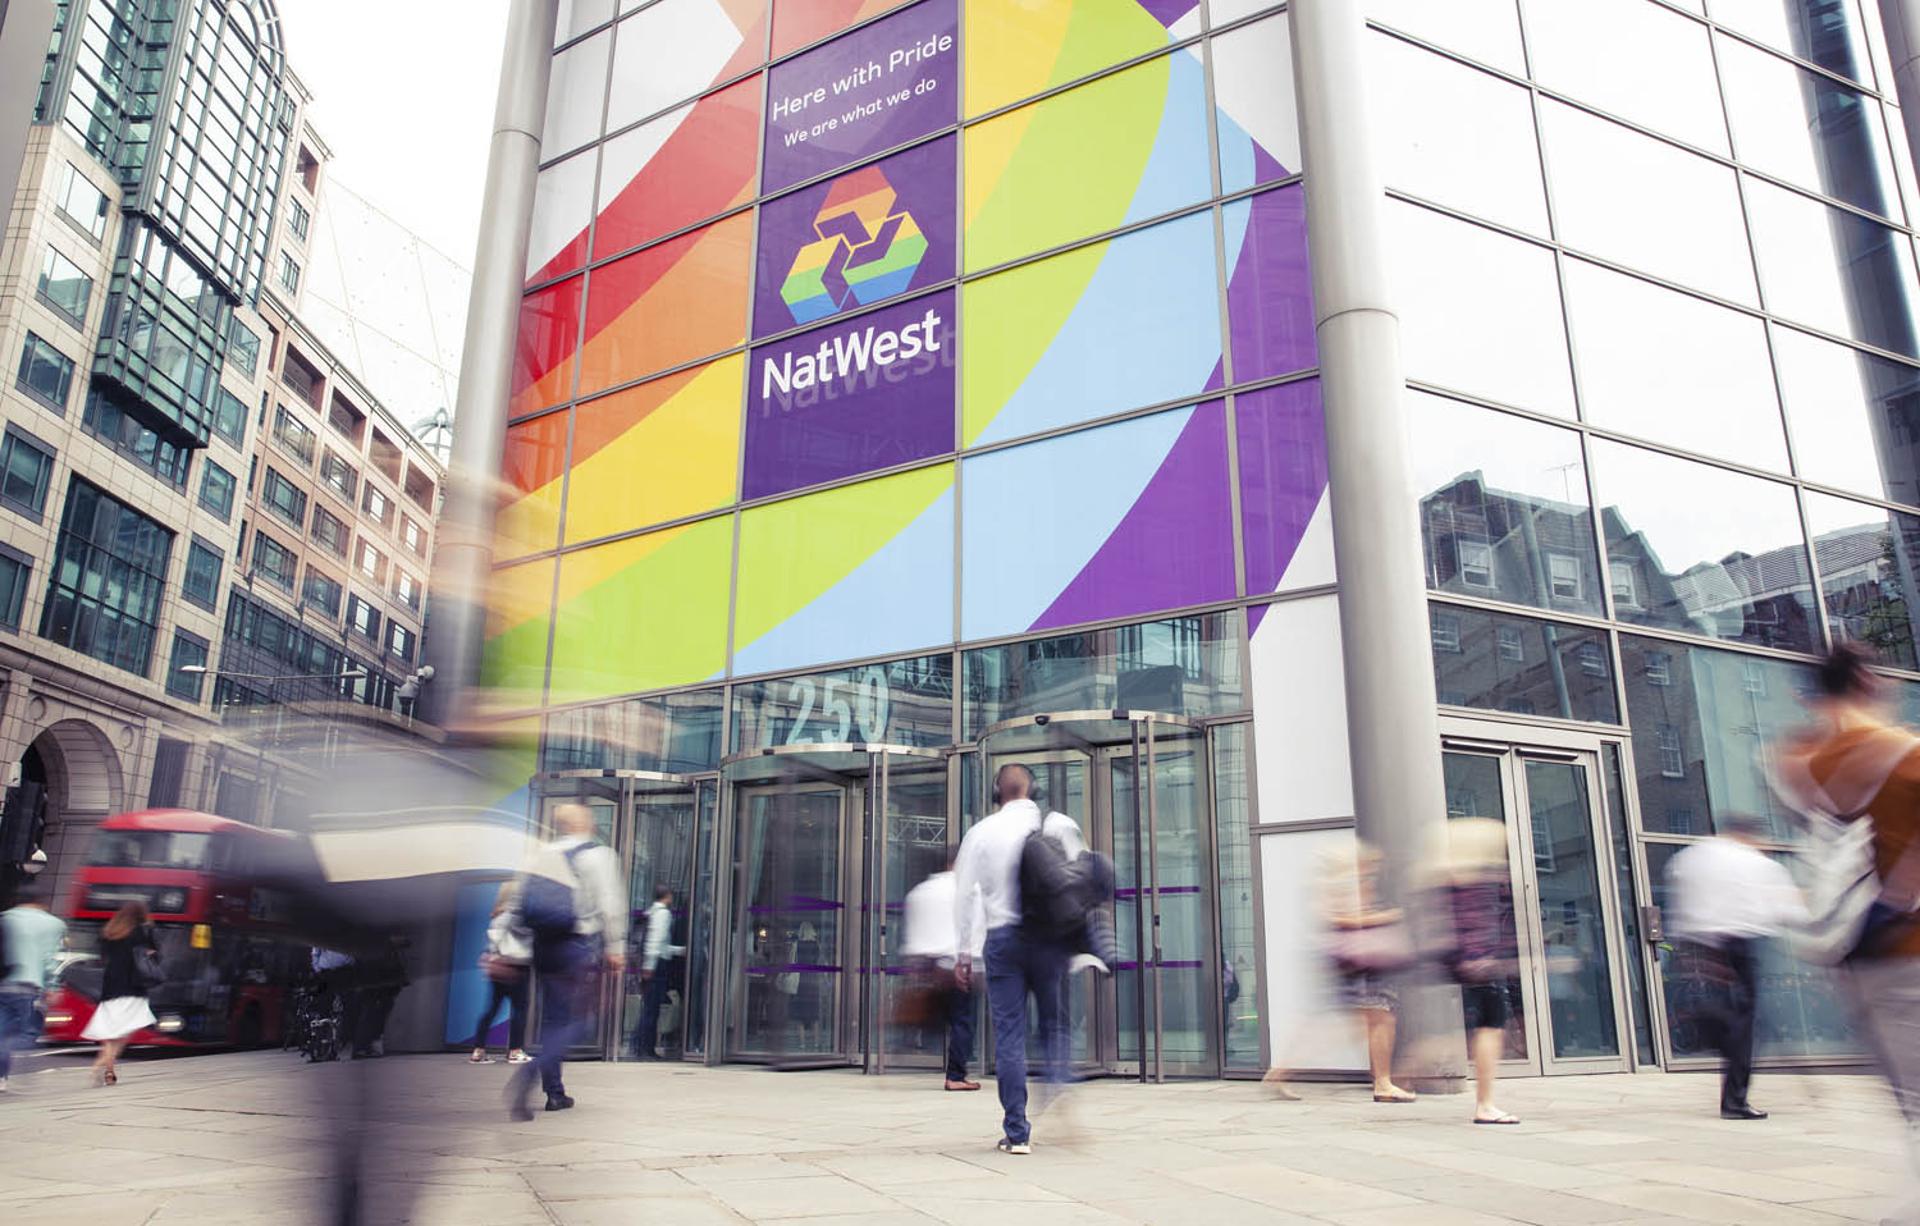 NatWest boss predicts further UK banking consolidation